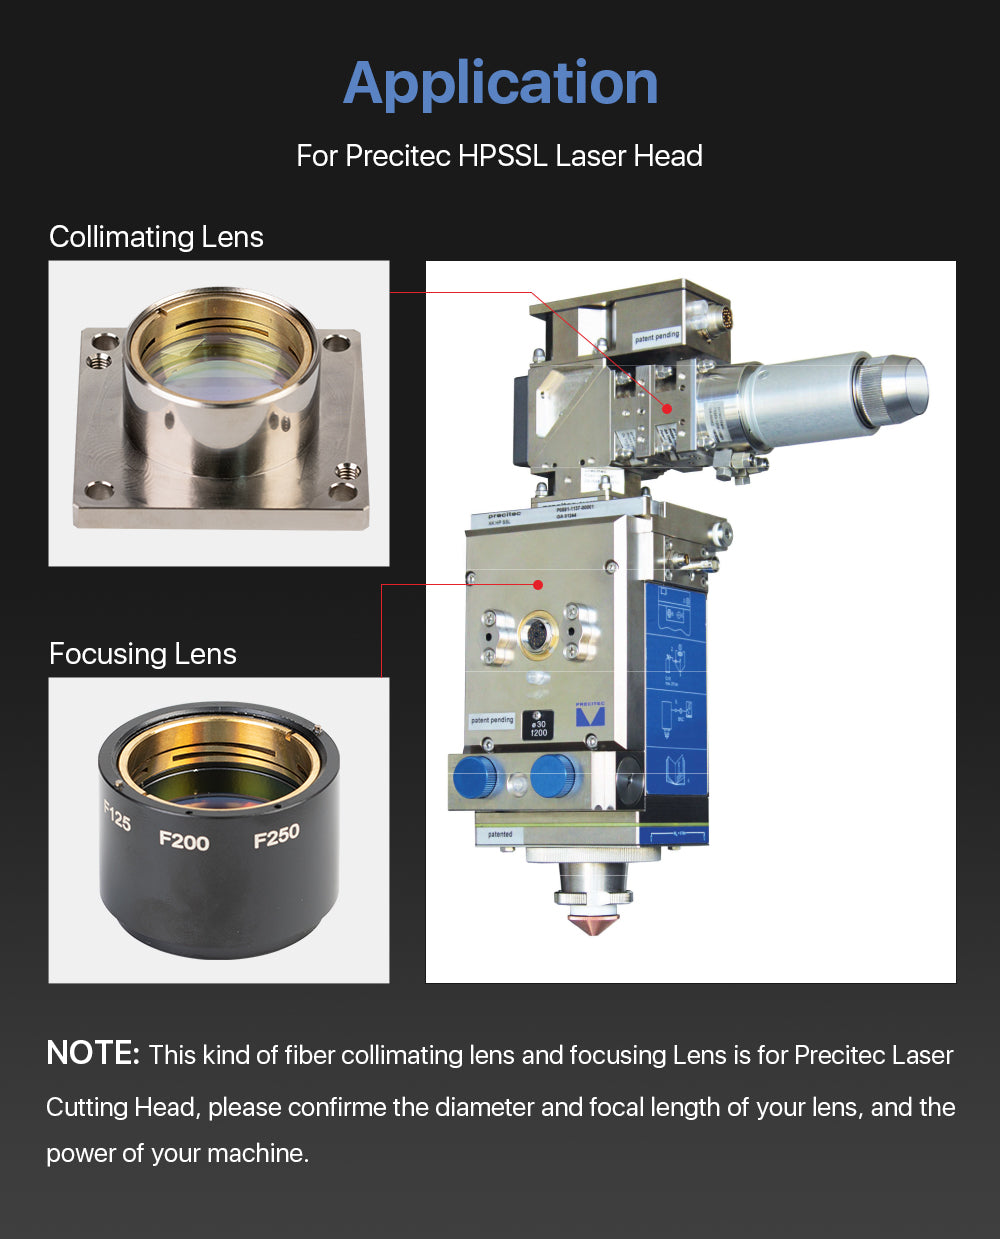 Cloudray Collimating & Focusing Lens For Precitec HPSSL Laser Cutting Head